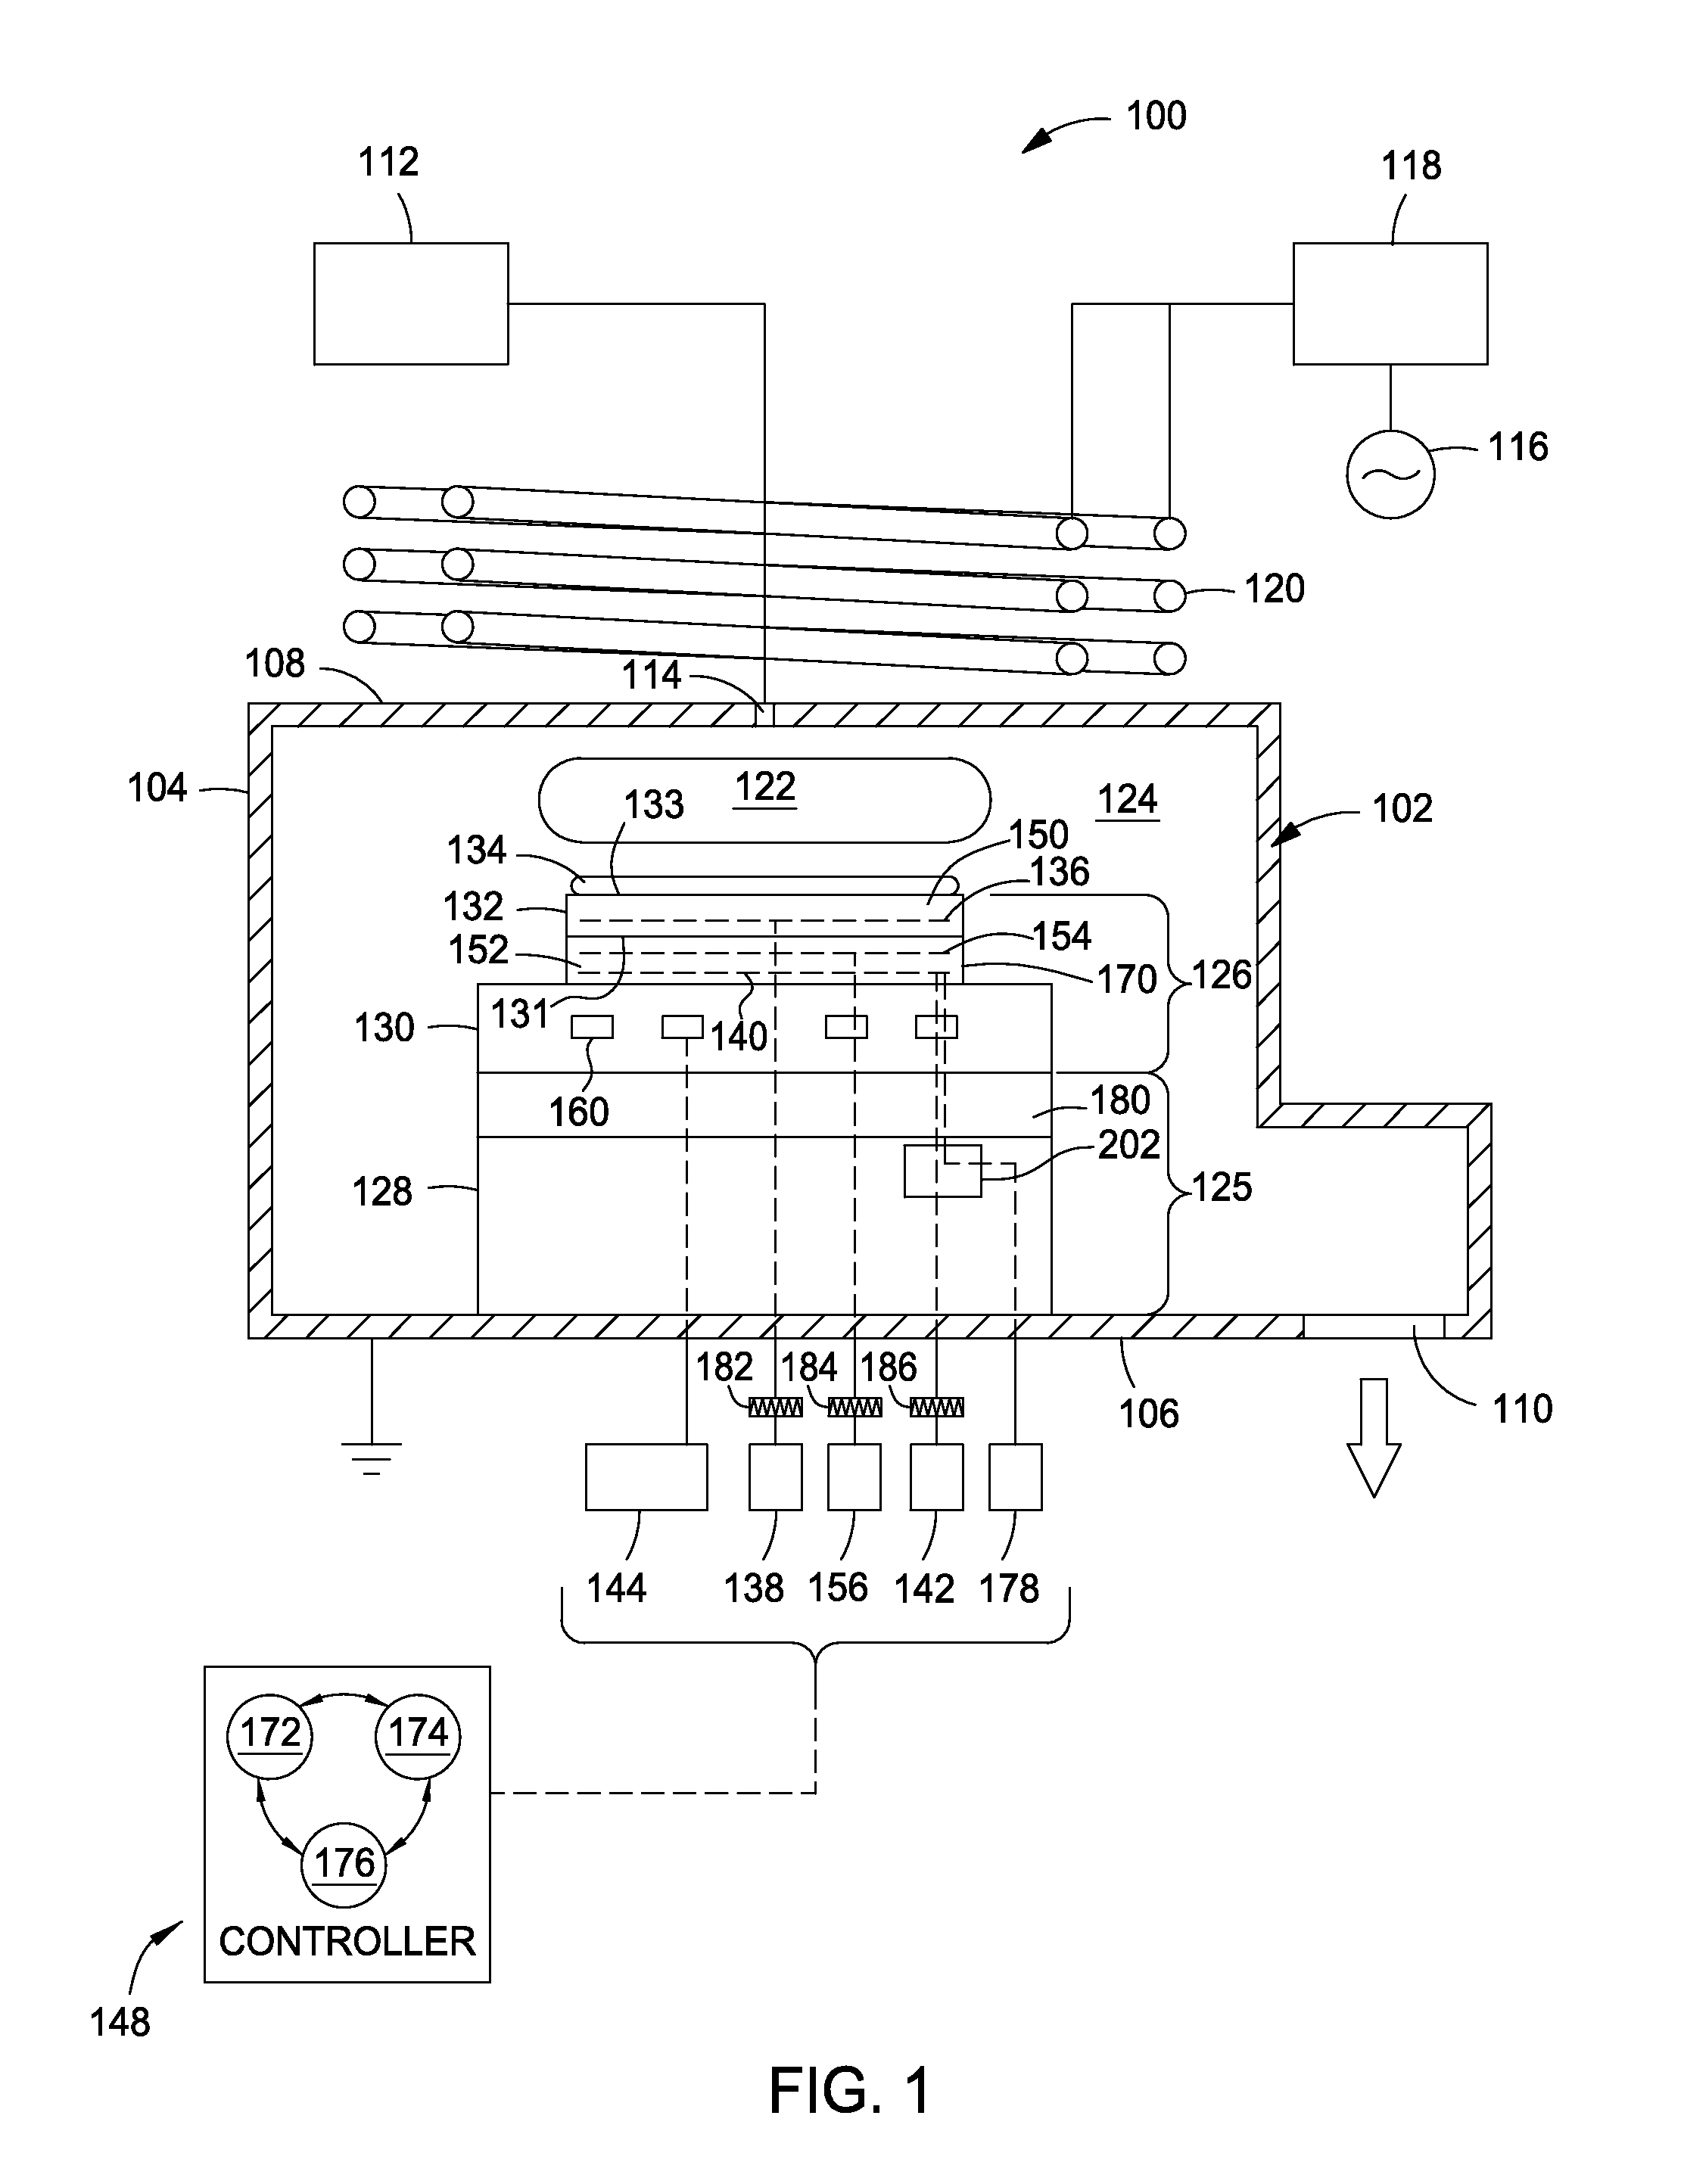 Pixilated temperature controlled substrate support assembly